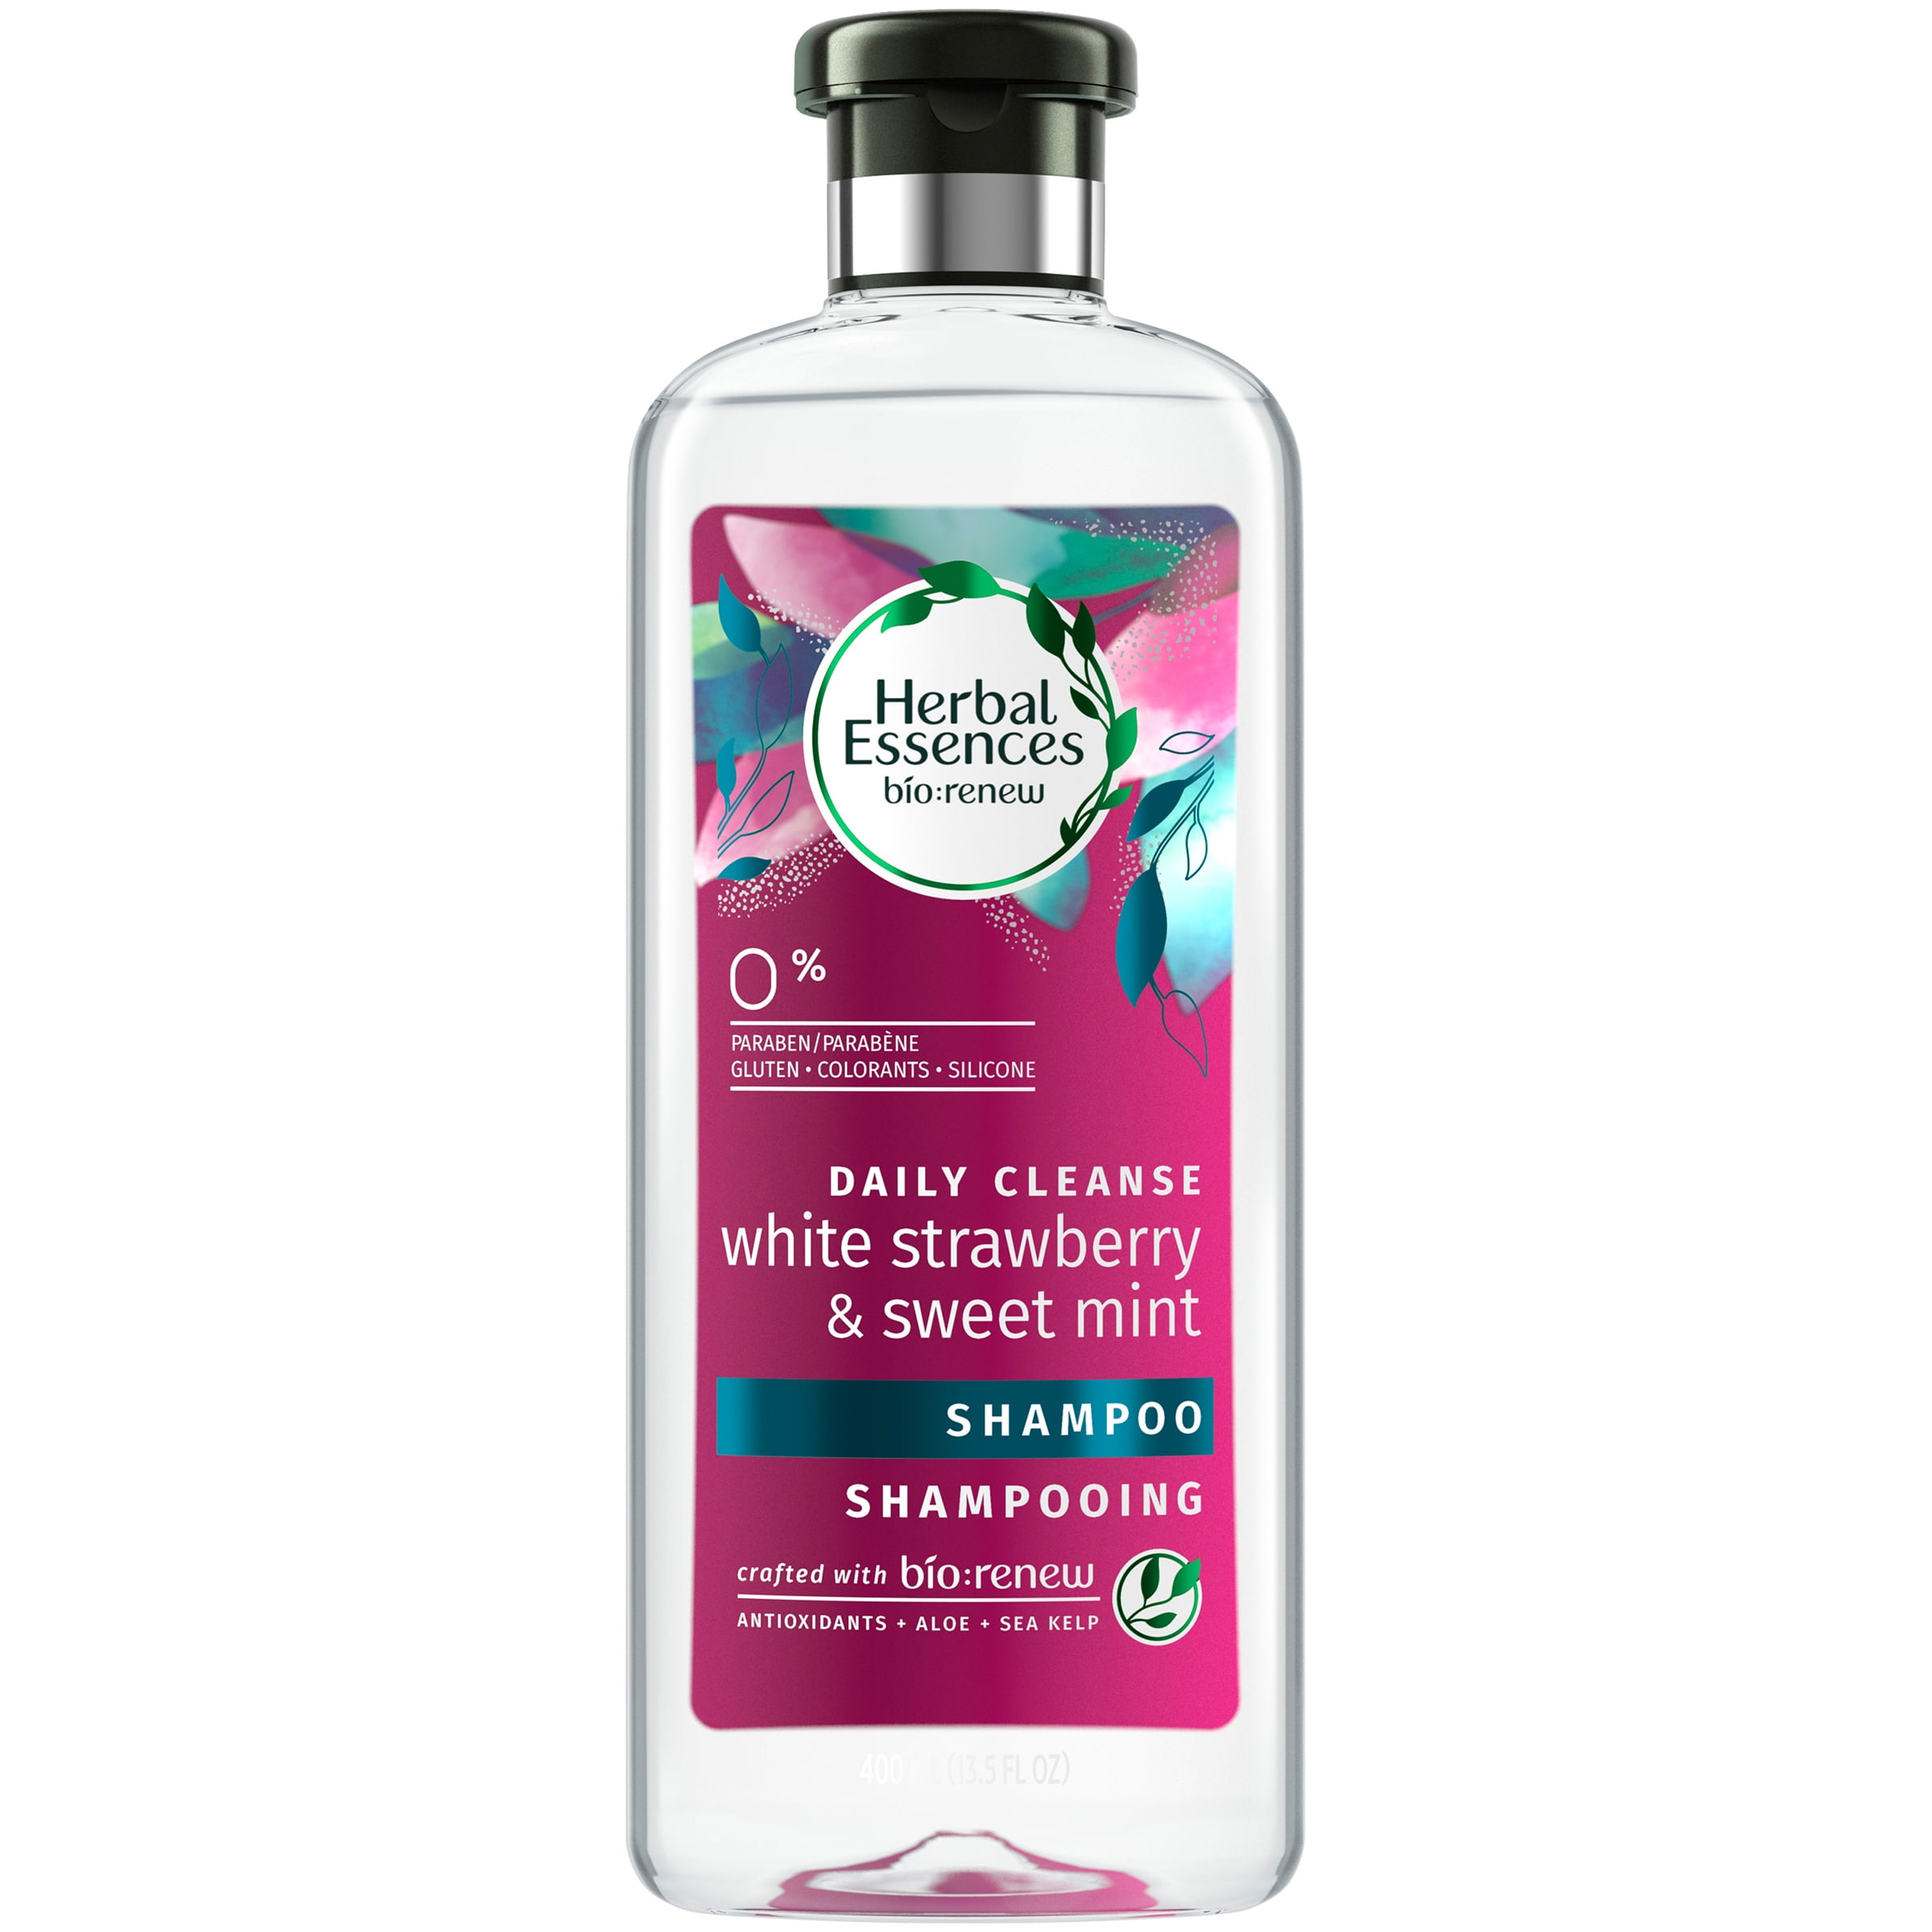 Herbal Essences Biorenew Daily Cleanse White Strawberry And Sweet Mint